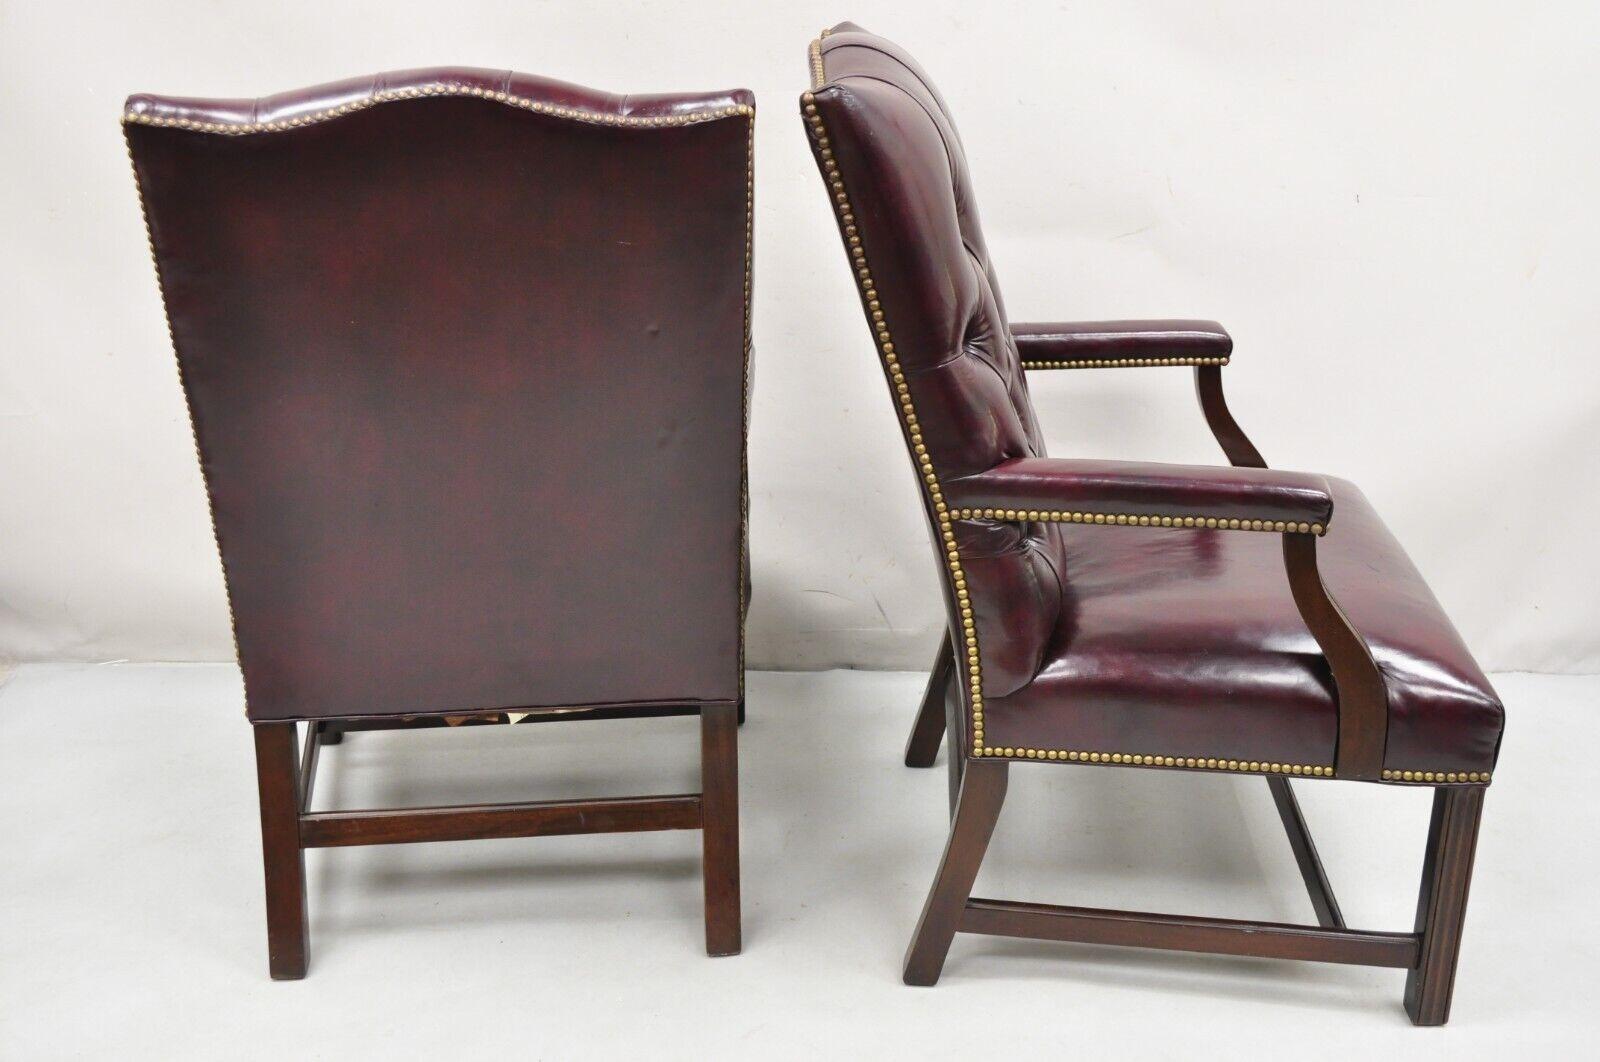 Hancock & Moore Oxblood Burgundy Leather Chesterfield Tufted Office Chairs Pair For Sale 5